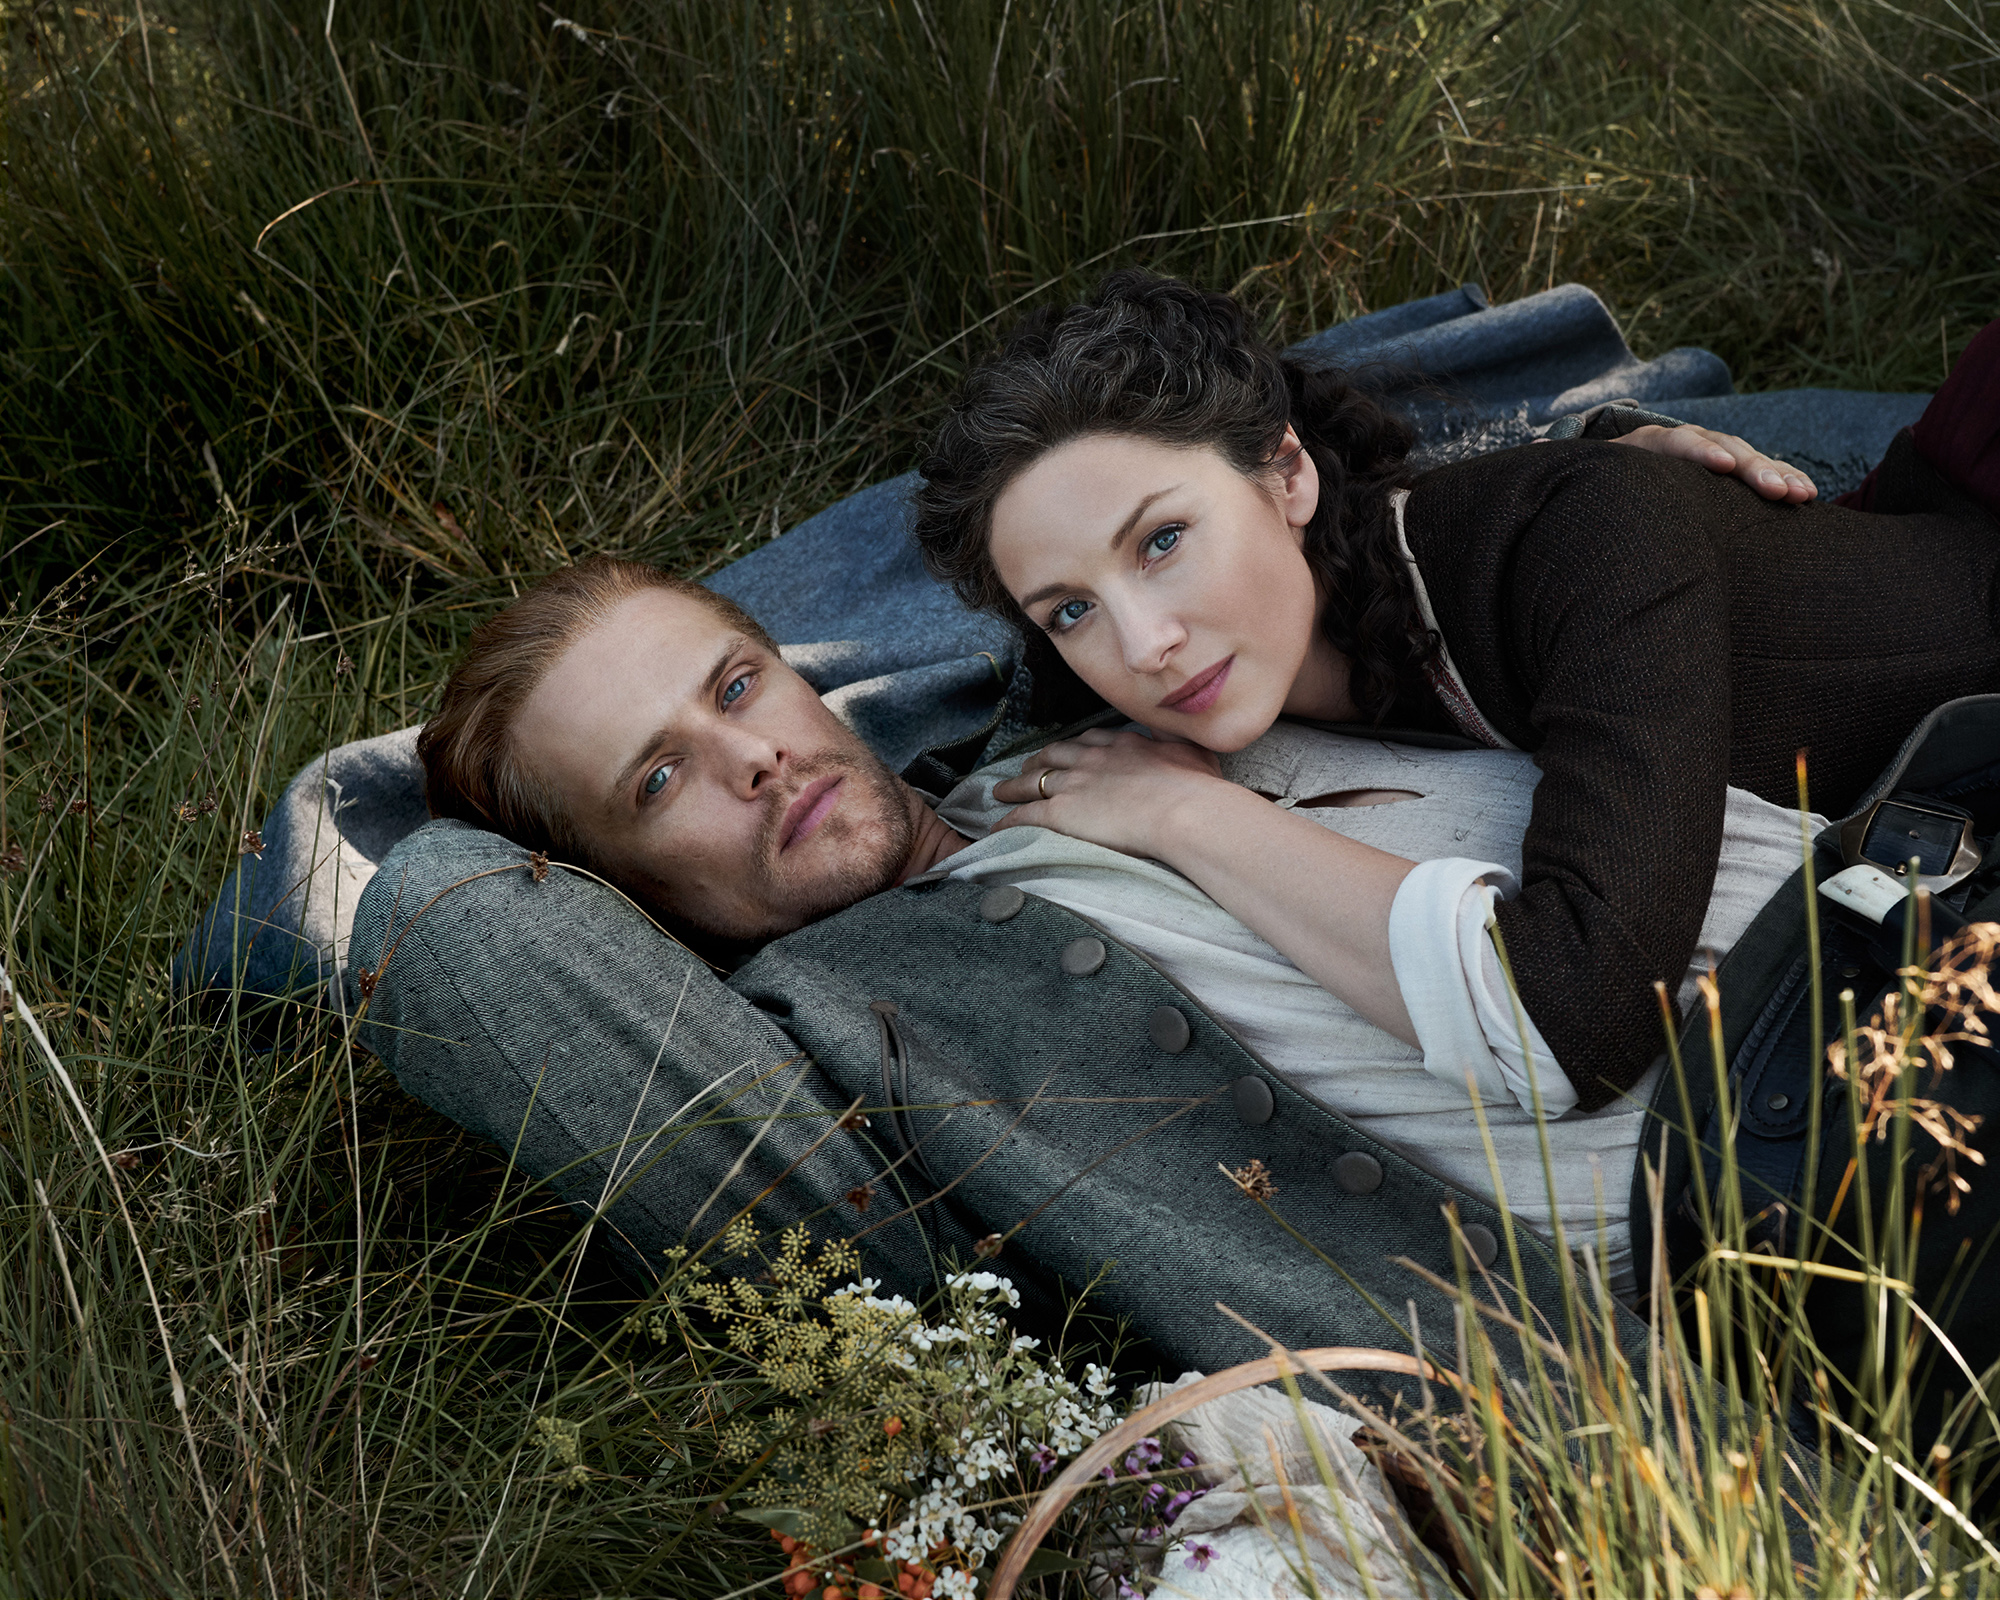 Outlander' Season 7: Release Date and How to Watch From Anywhere - CNET